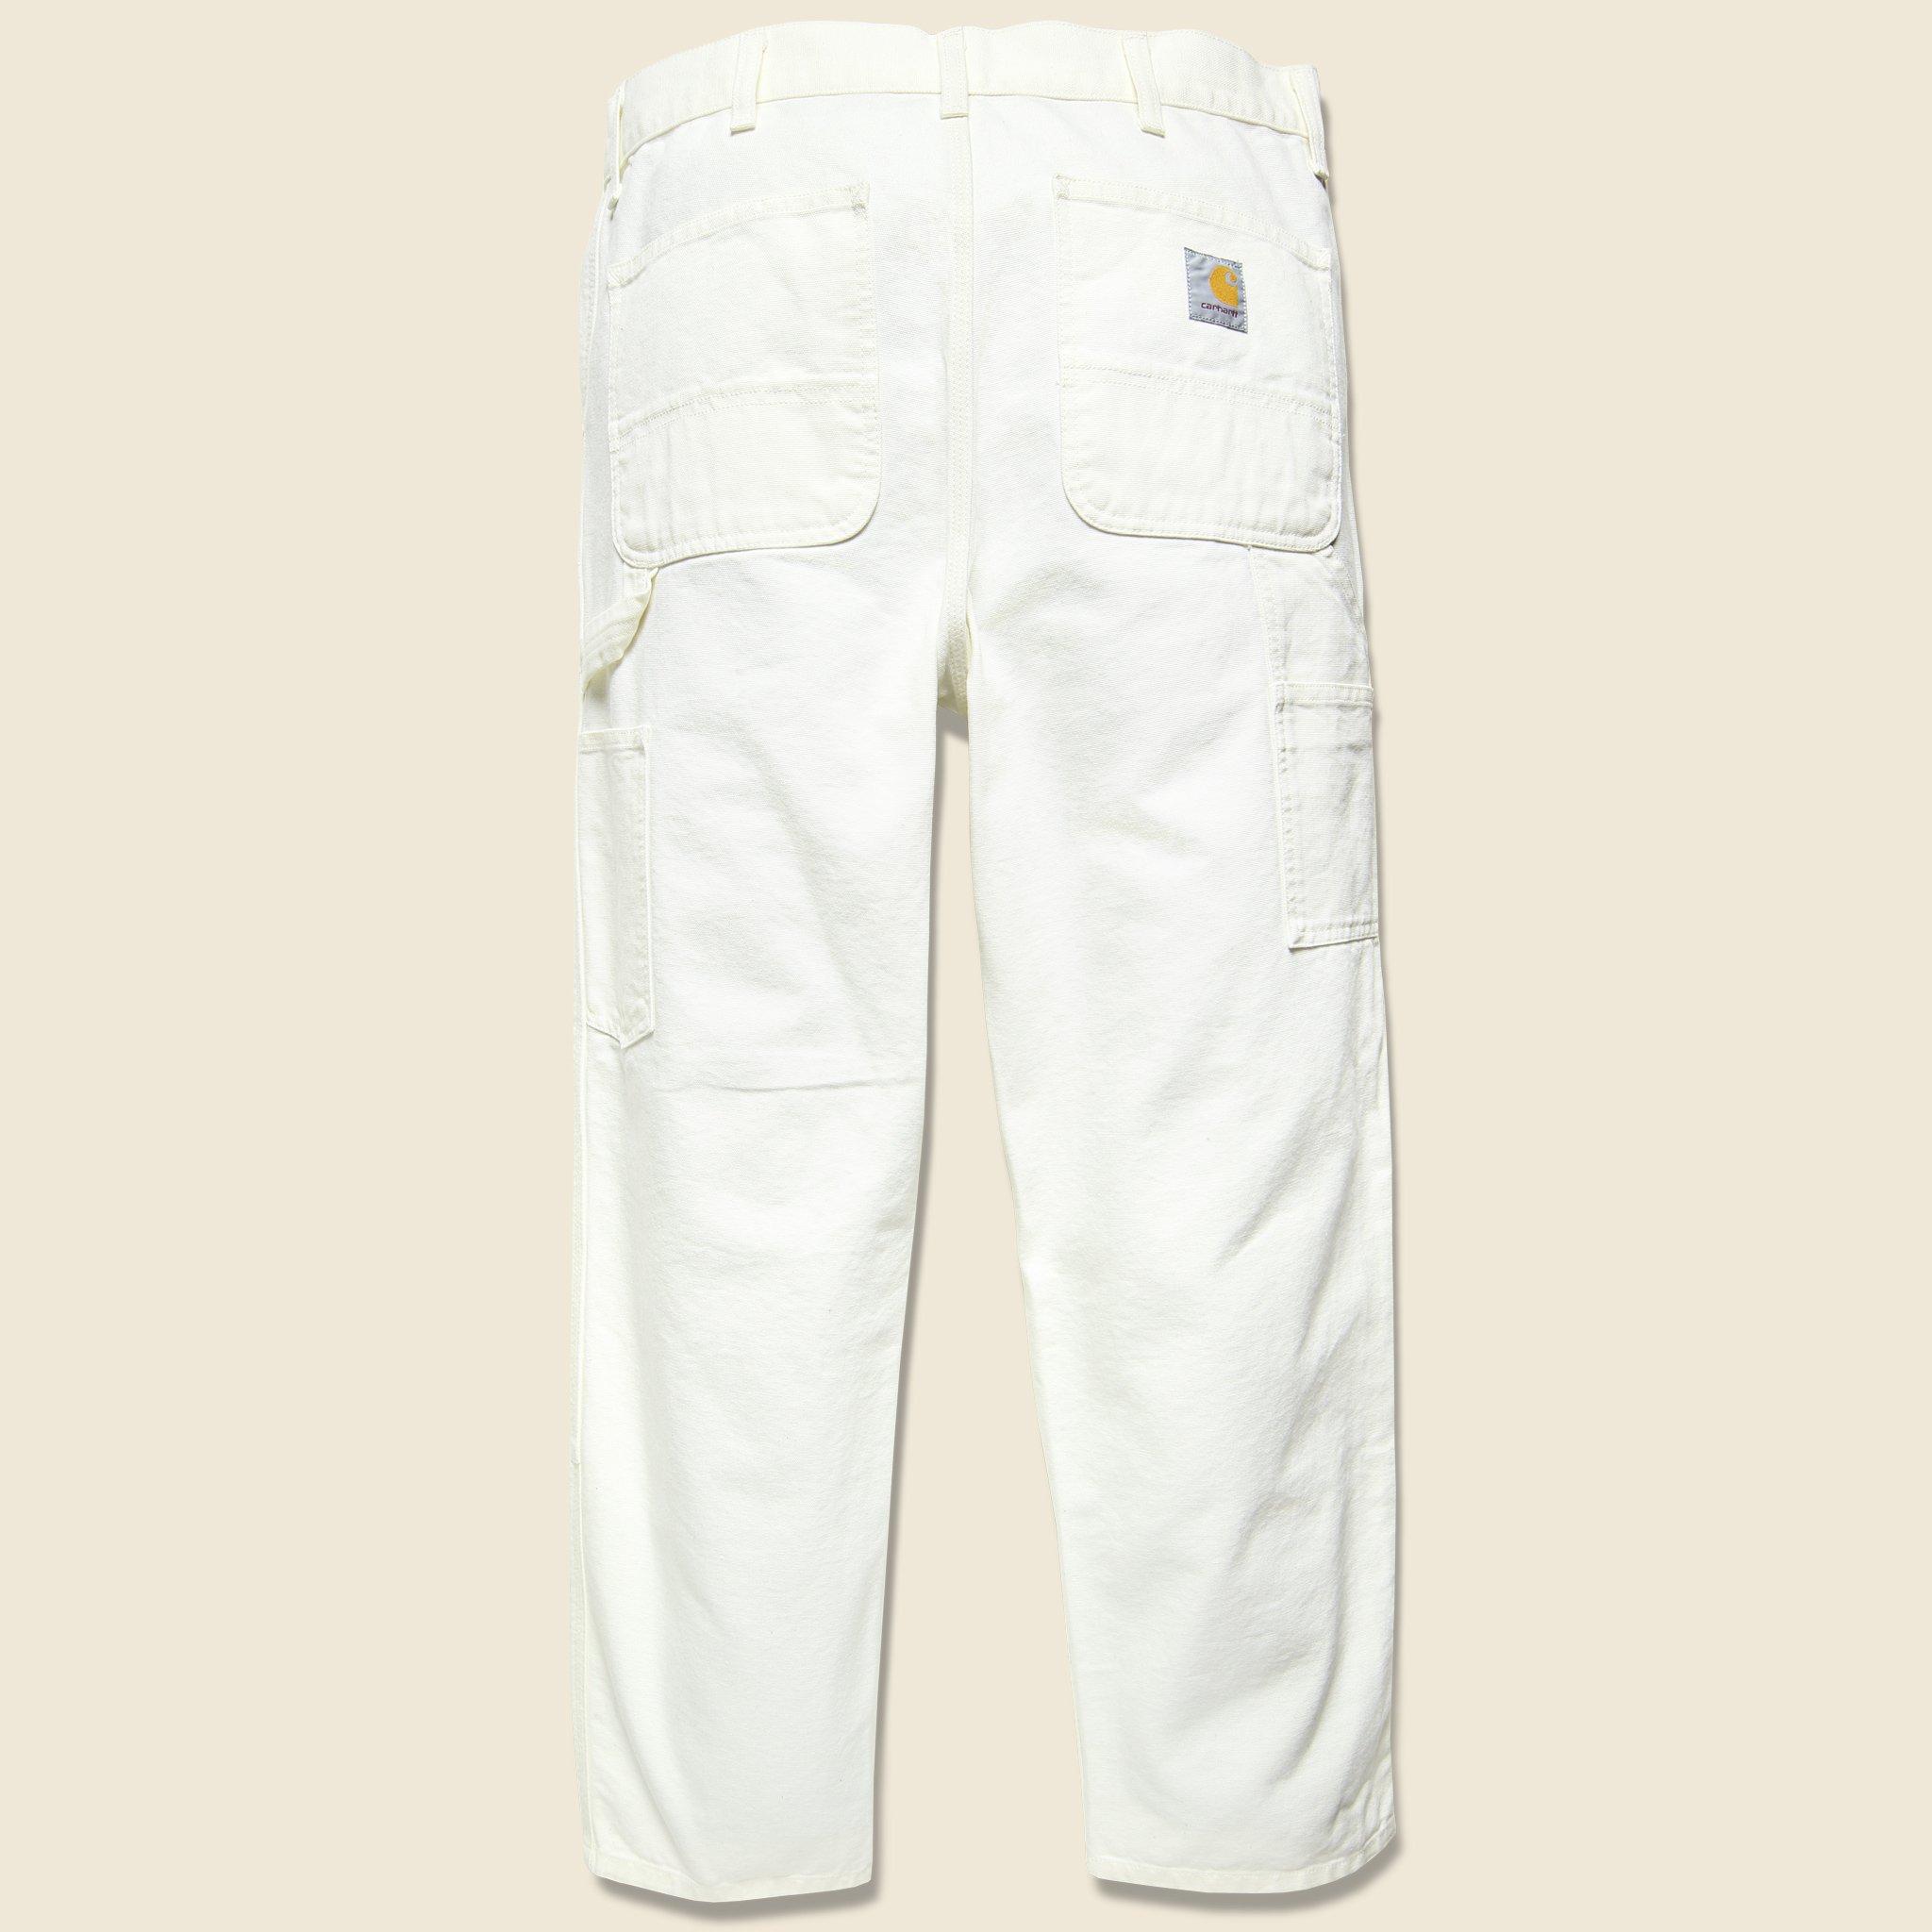 Carhartt WIP Cotton Double Knee Pant in White for Men - Lyst